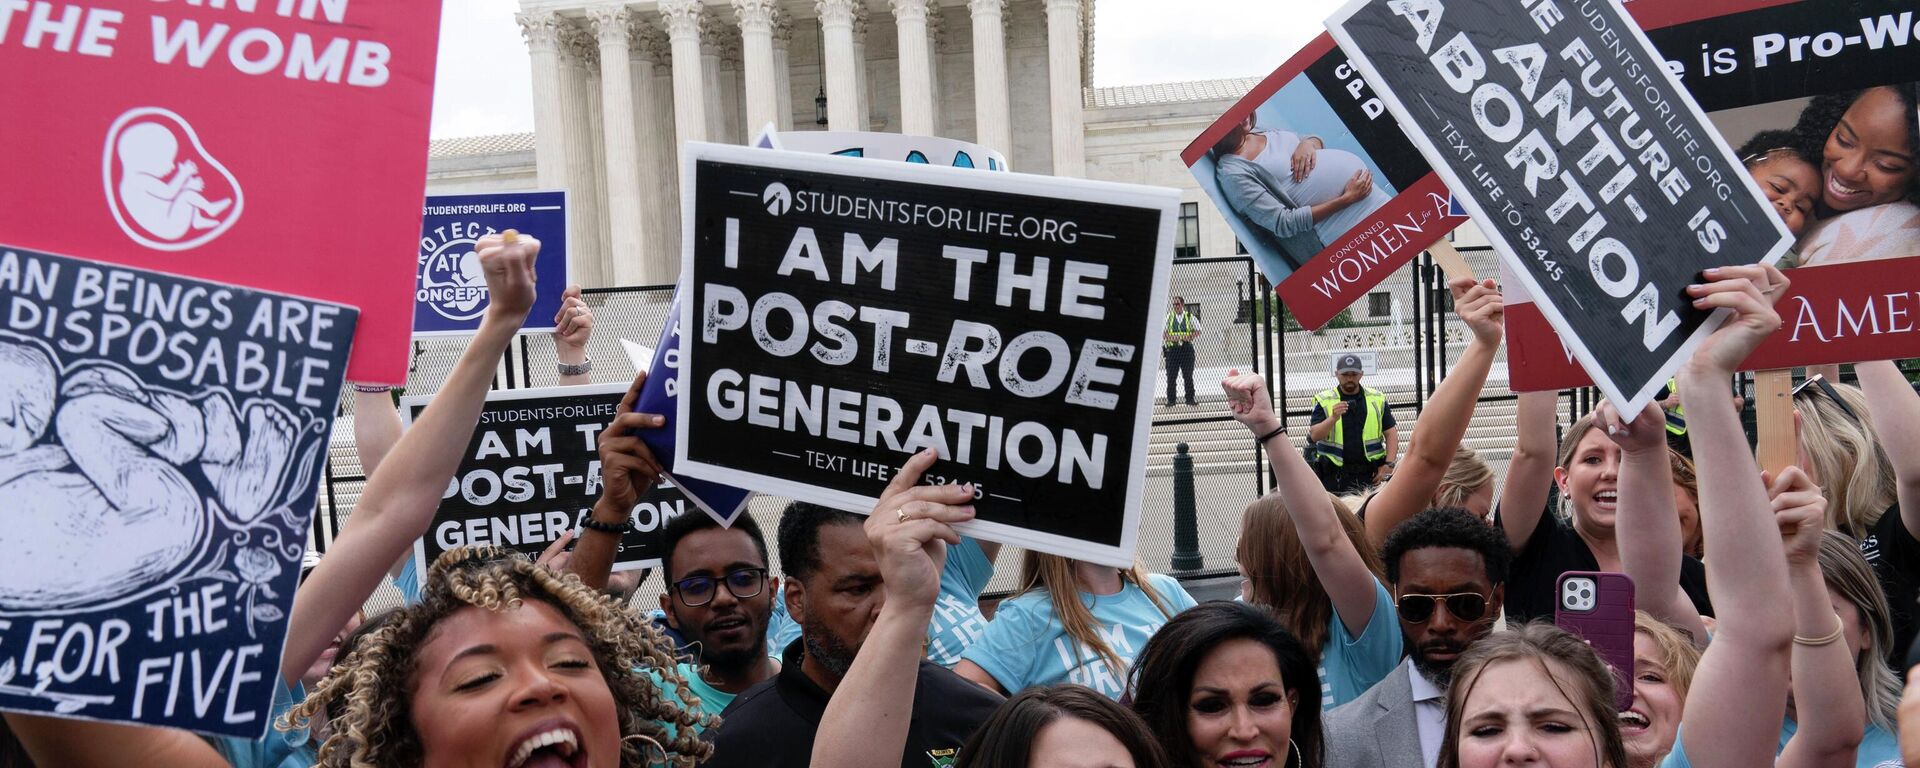 Demonstrators gather outside the Supreme Court in Washington, Friday, June 24, 2022. The Supreme Court has ended constitutional protections for abortion that had been in place nearly 50 years, a decision by its conservative majority to overturn the court's landmark abortion cases. (AP Photo/Jose Luis Magana) - Sputnik International, 1920, 25.06.2022